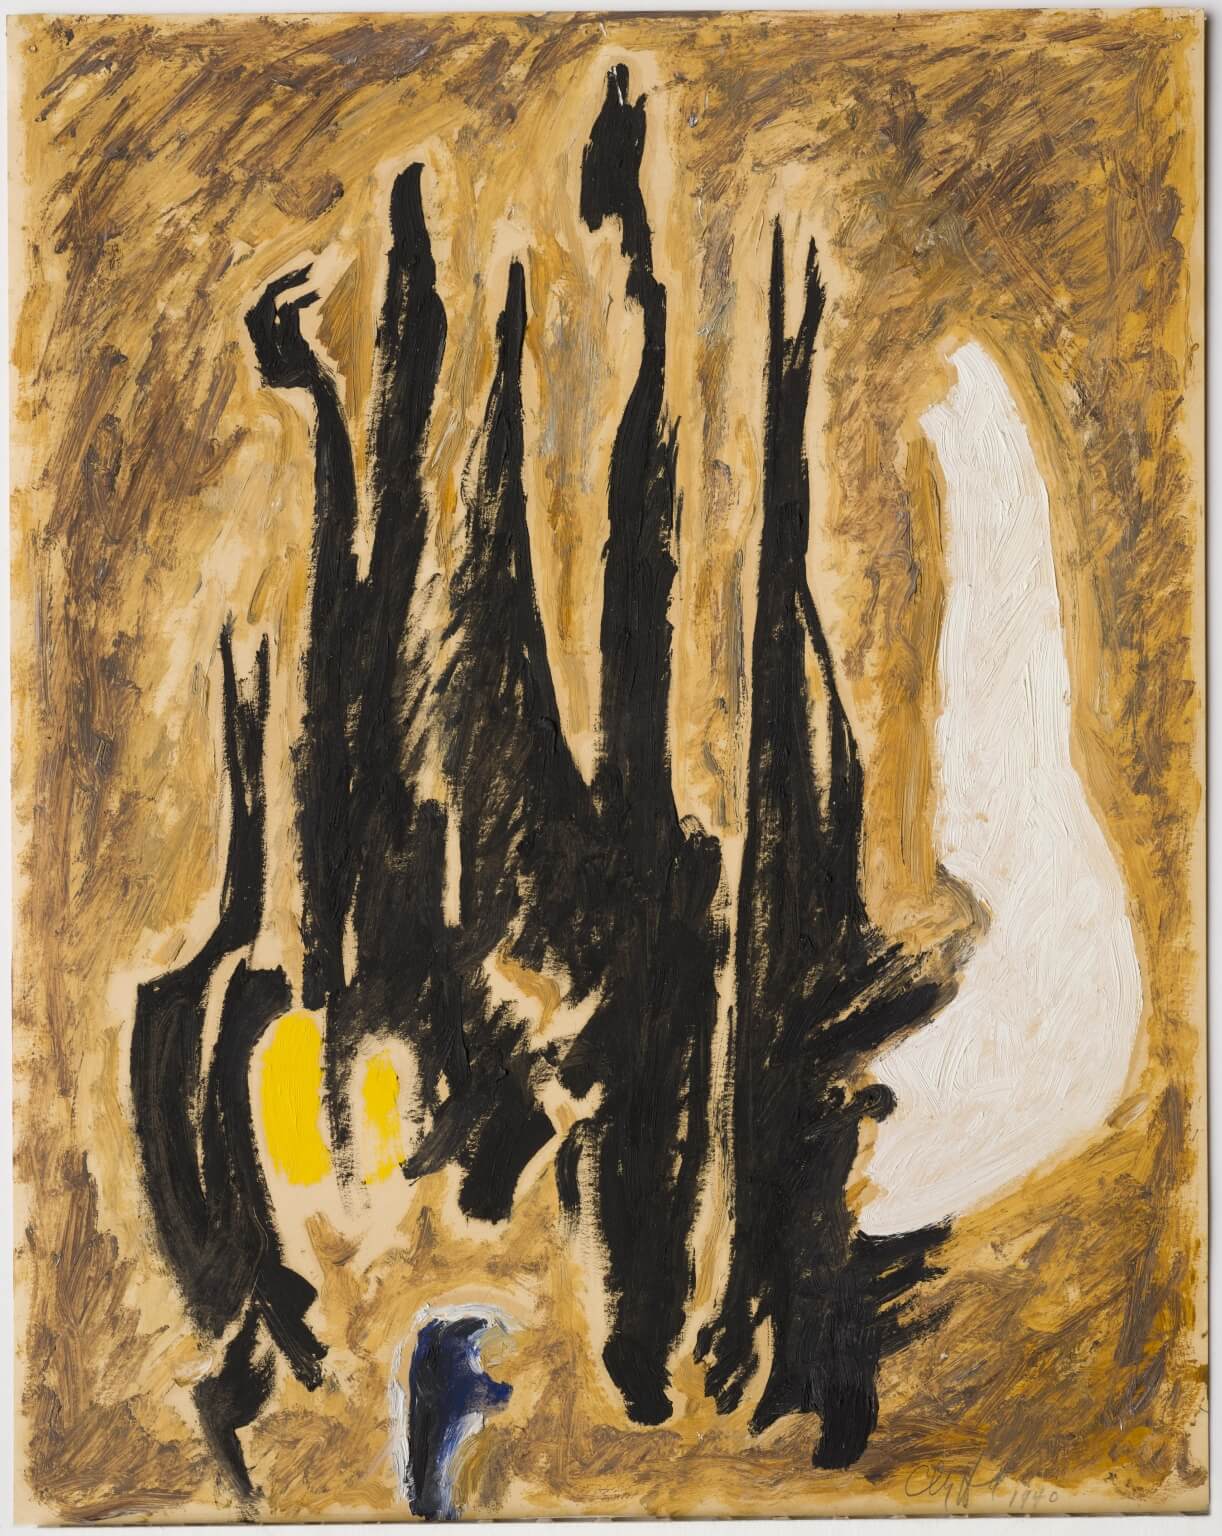 Abstract oil painting on paper with a tan and light brown background, thin black figures moving upward, a white empty figure to the right, and a yellow circle under the black figures